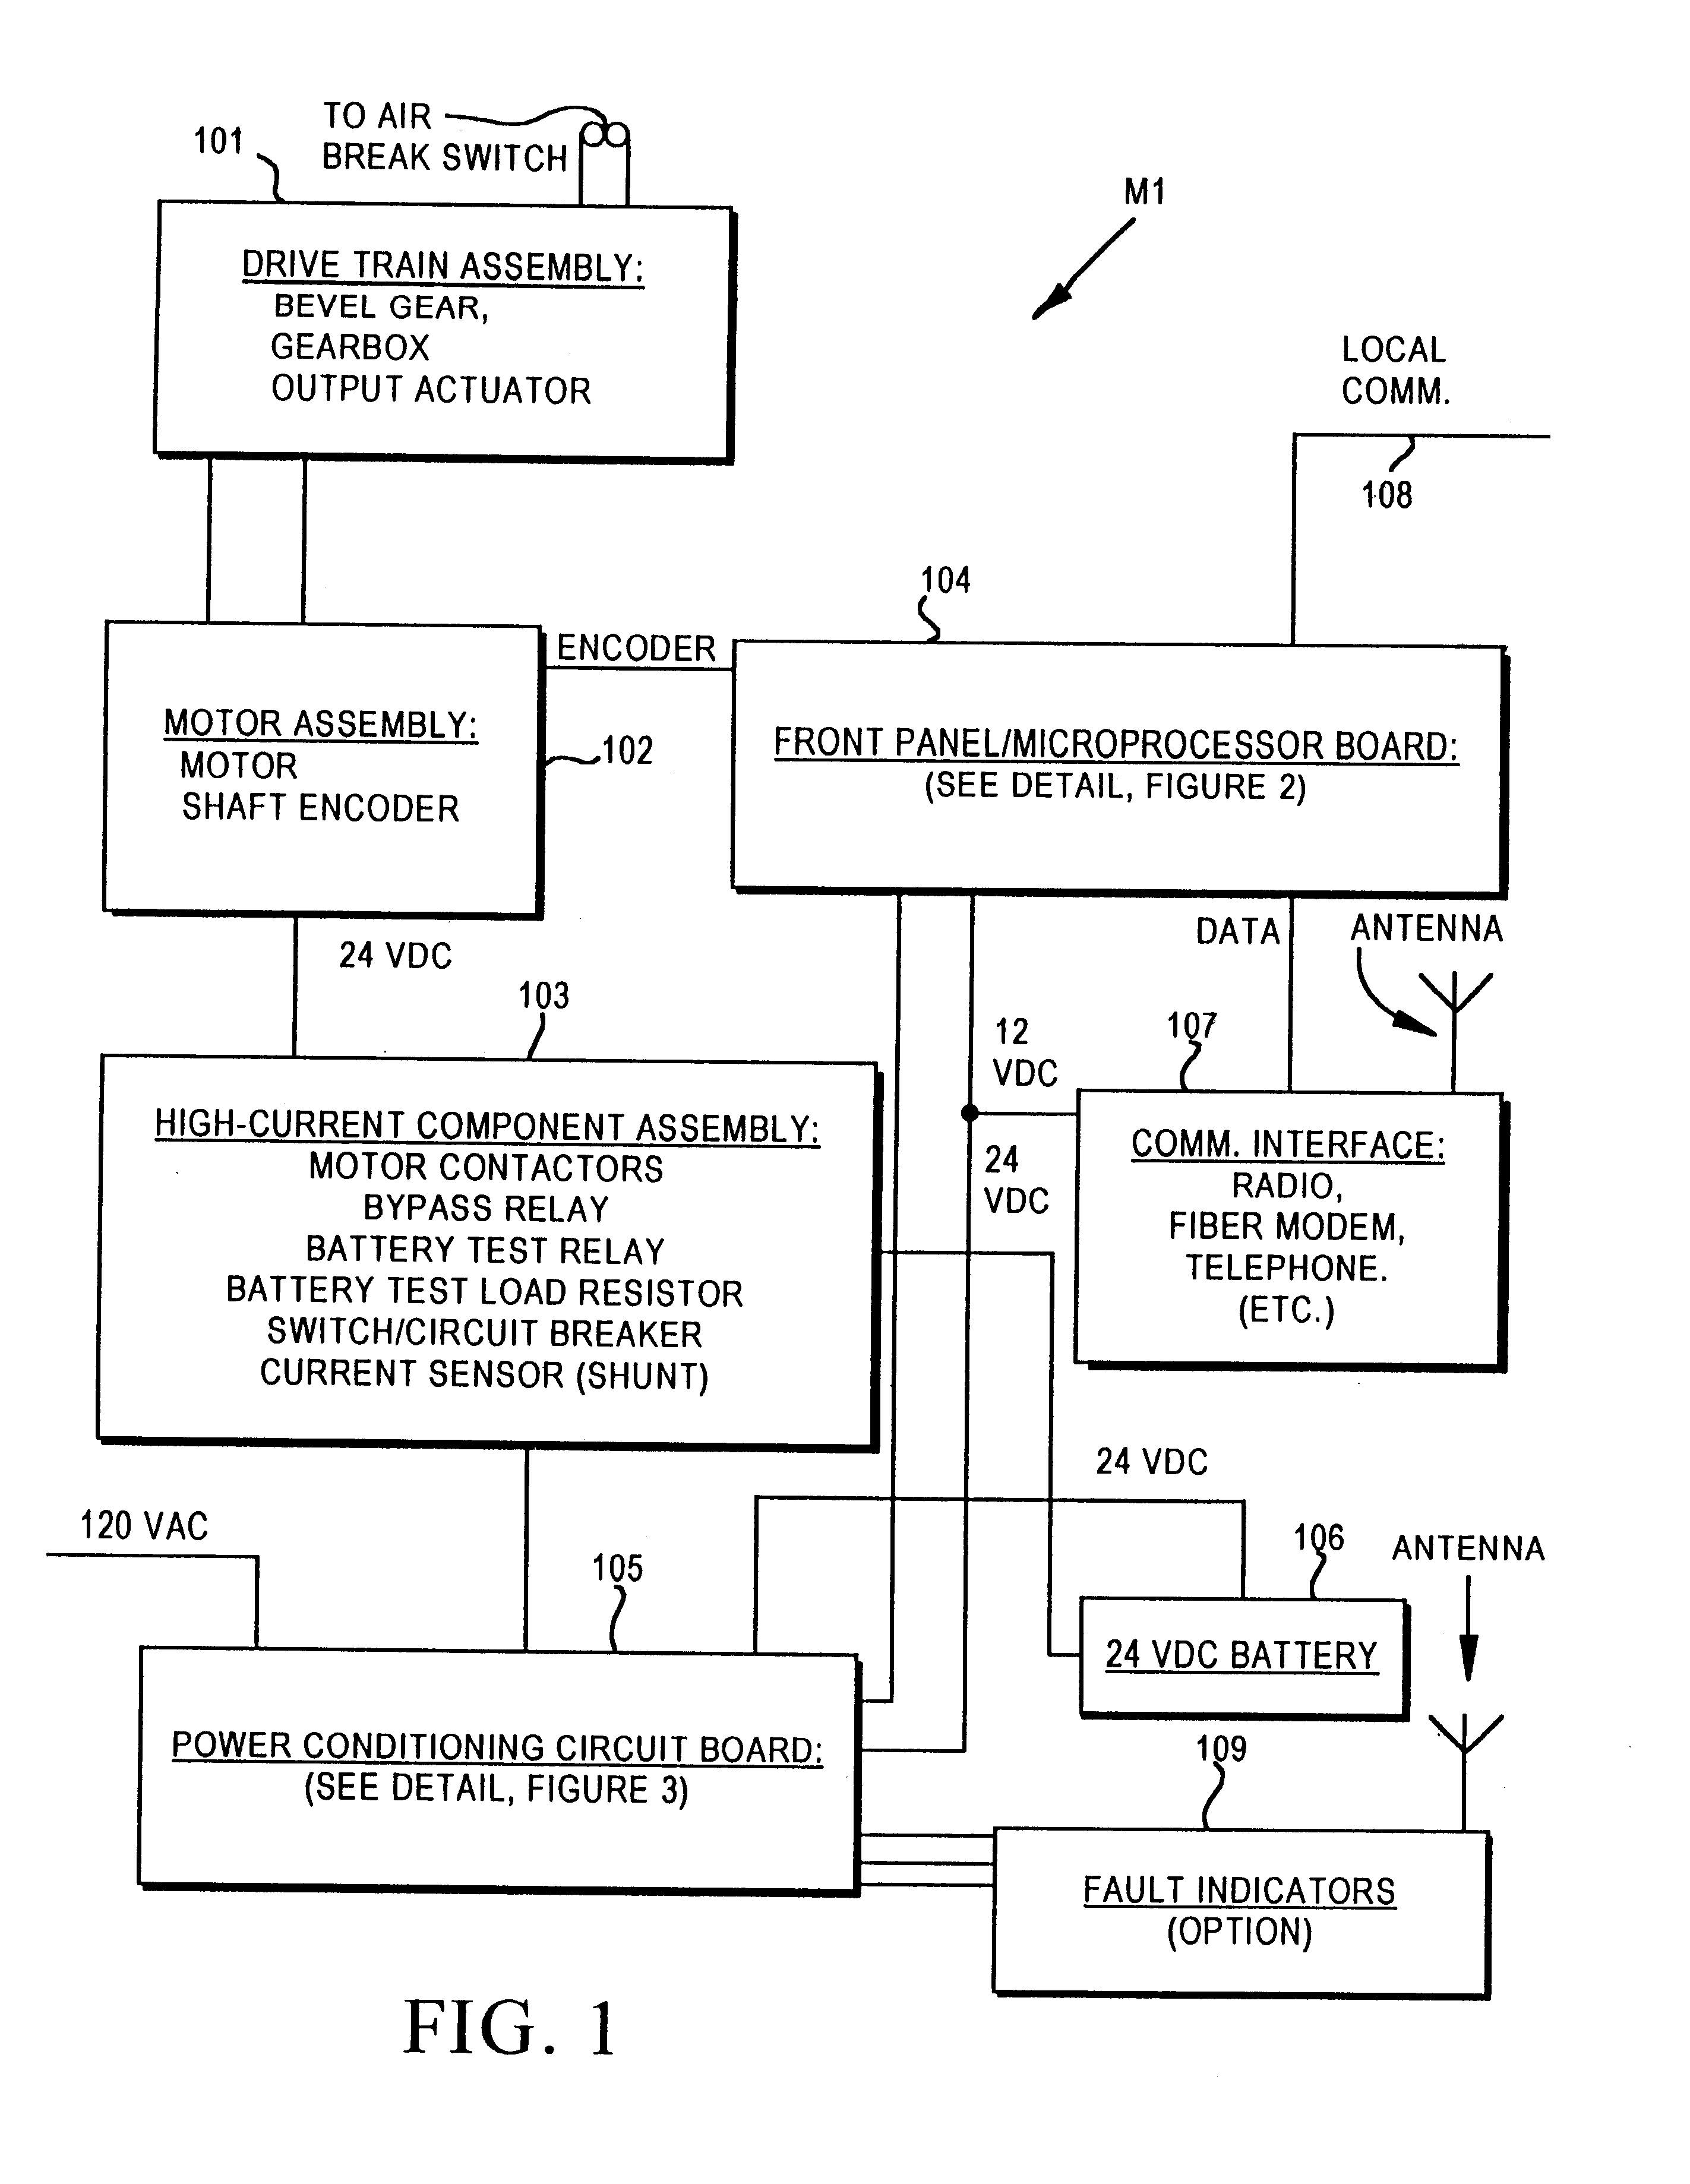 Motor operator for over-head air break electrical power distribution switches